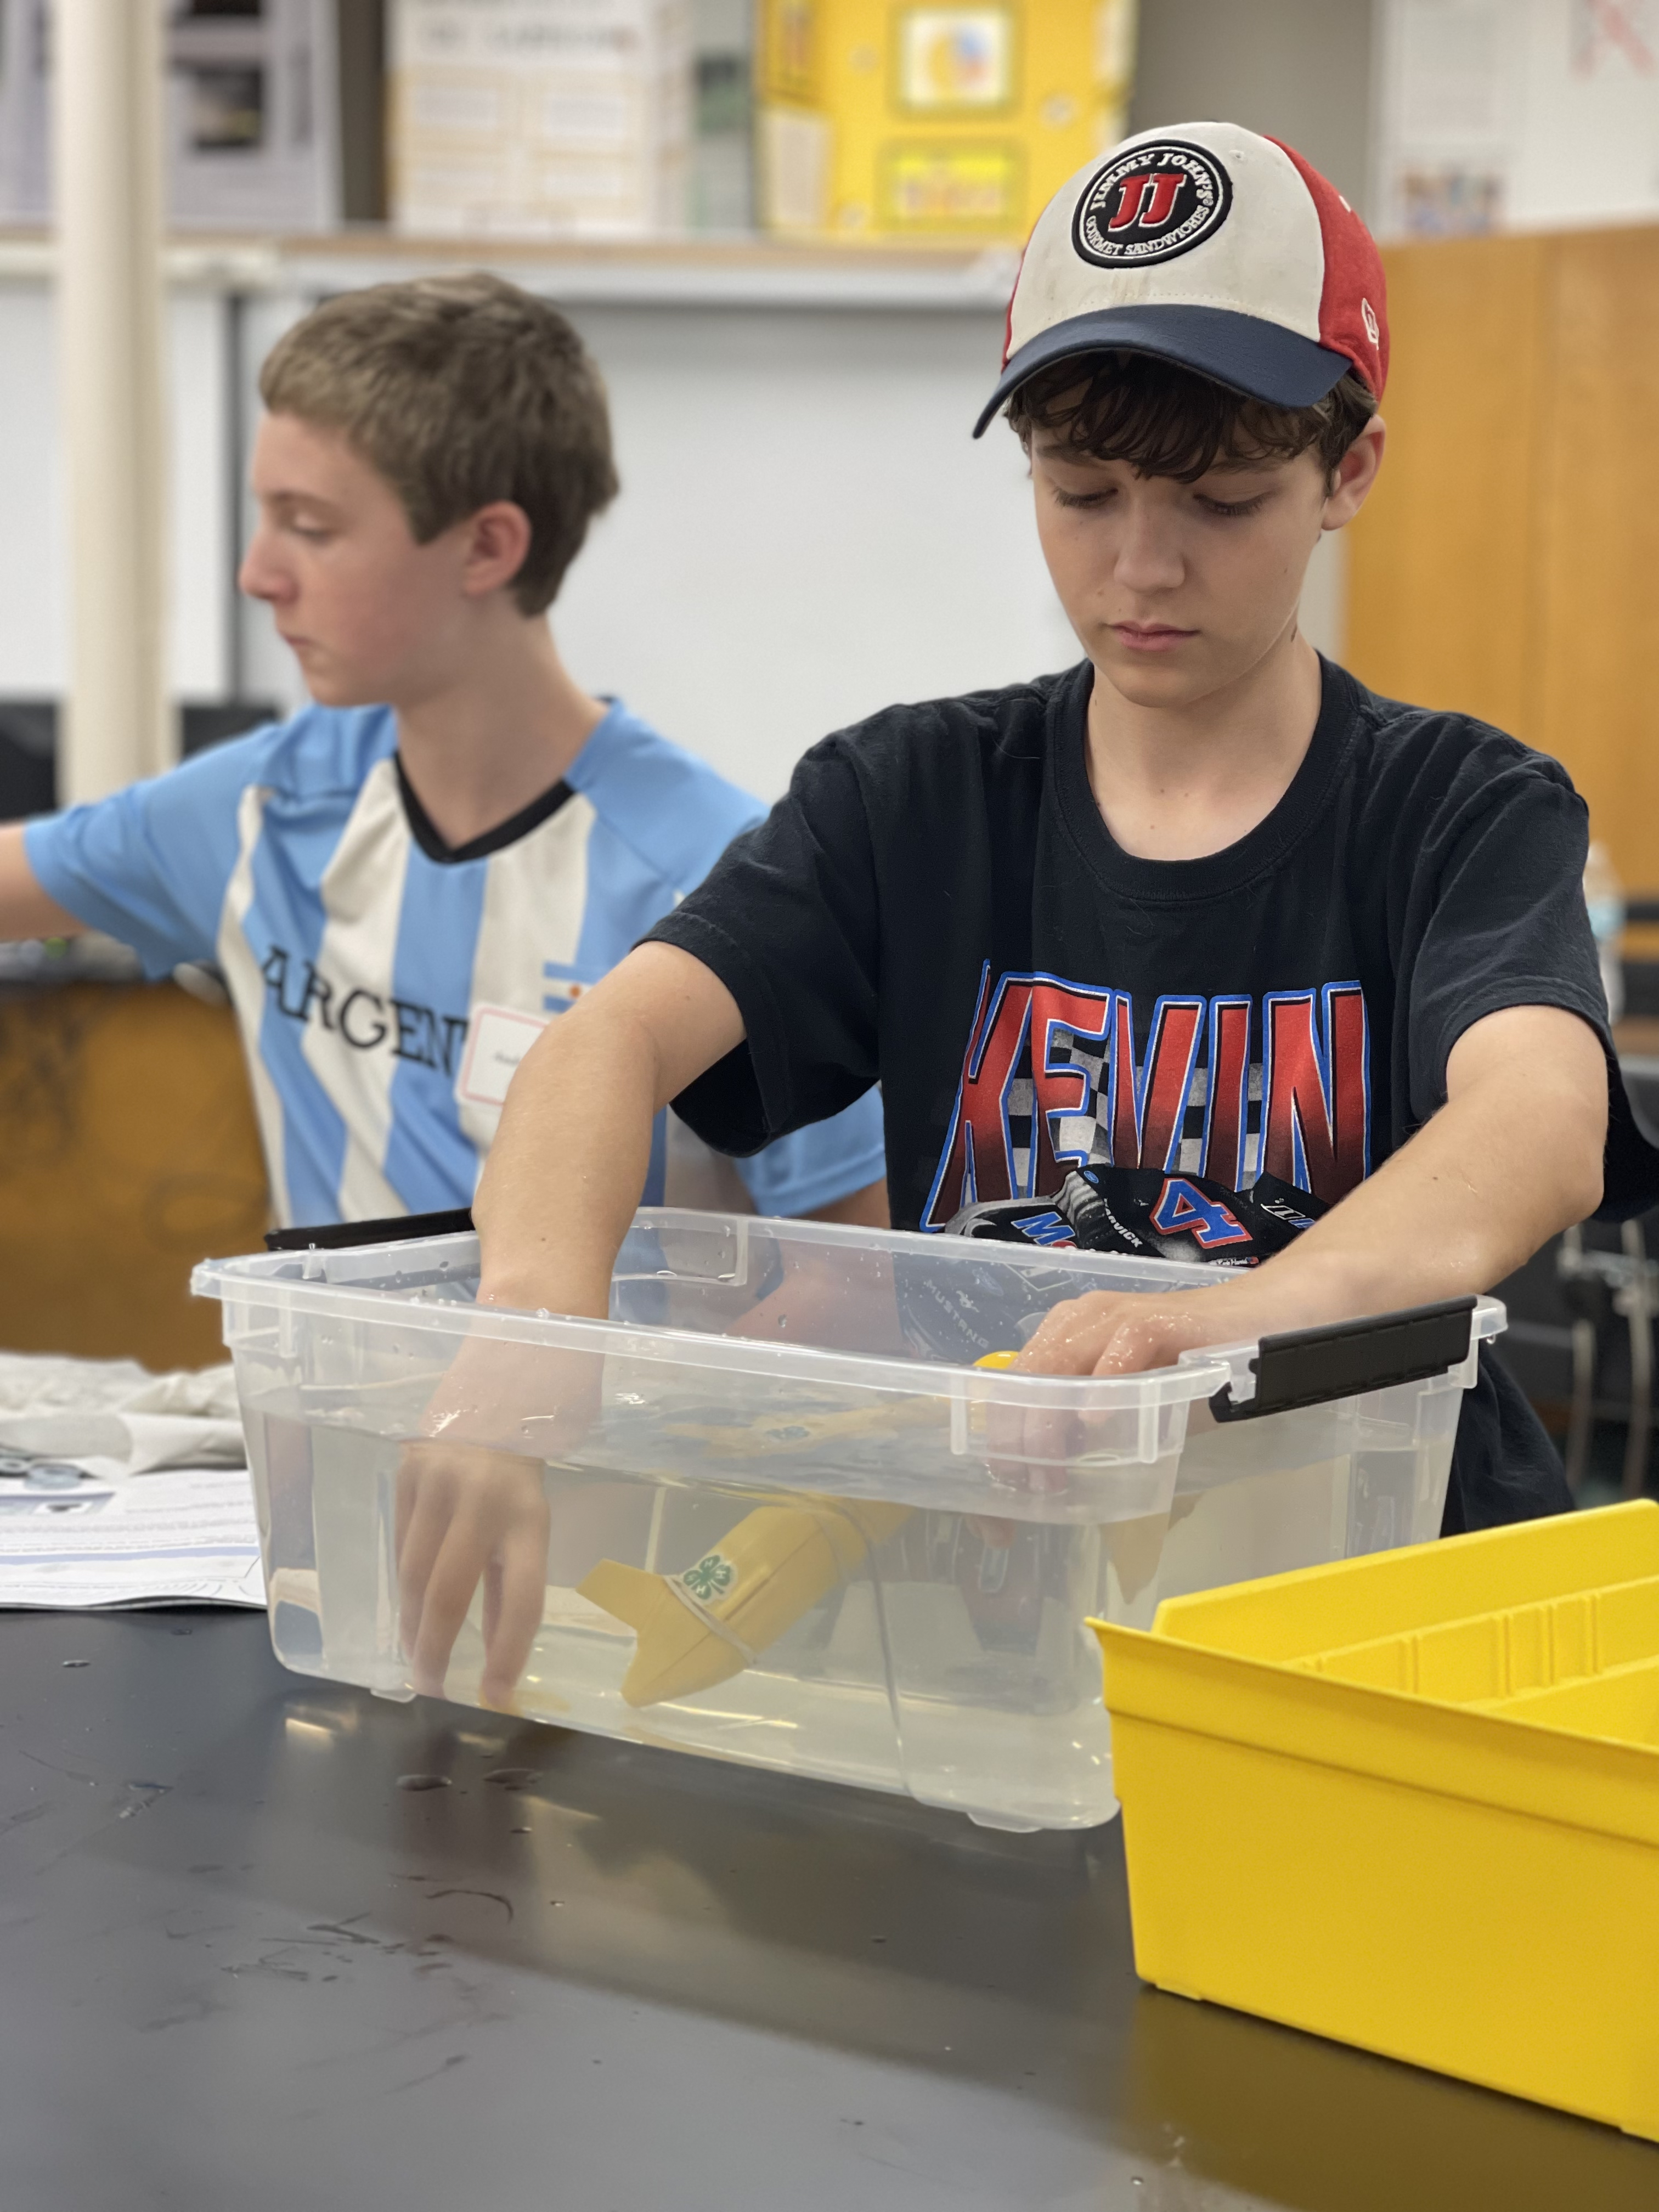 Will Perry works to ballast his ocean robot model during 4-H STEM Night on October 13 at CCC&TI. Ballasting involves adding or removing weights to vessels to change their buoyancy.